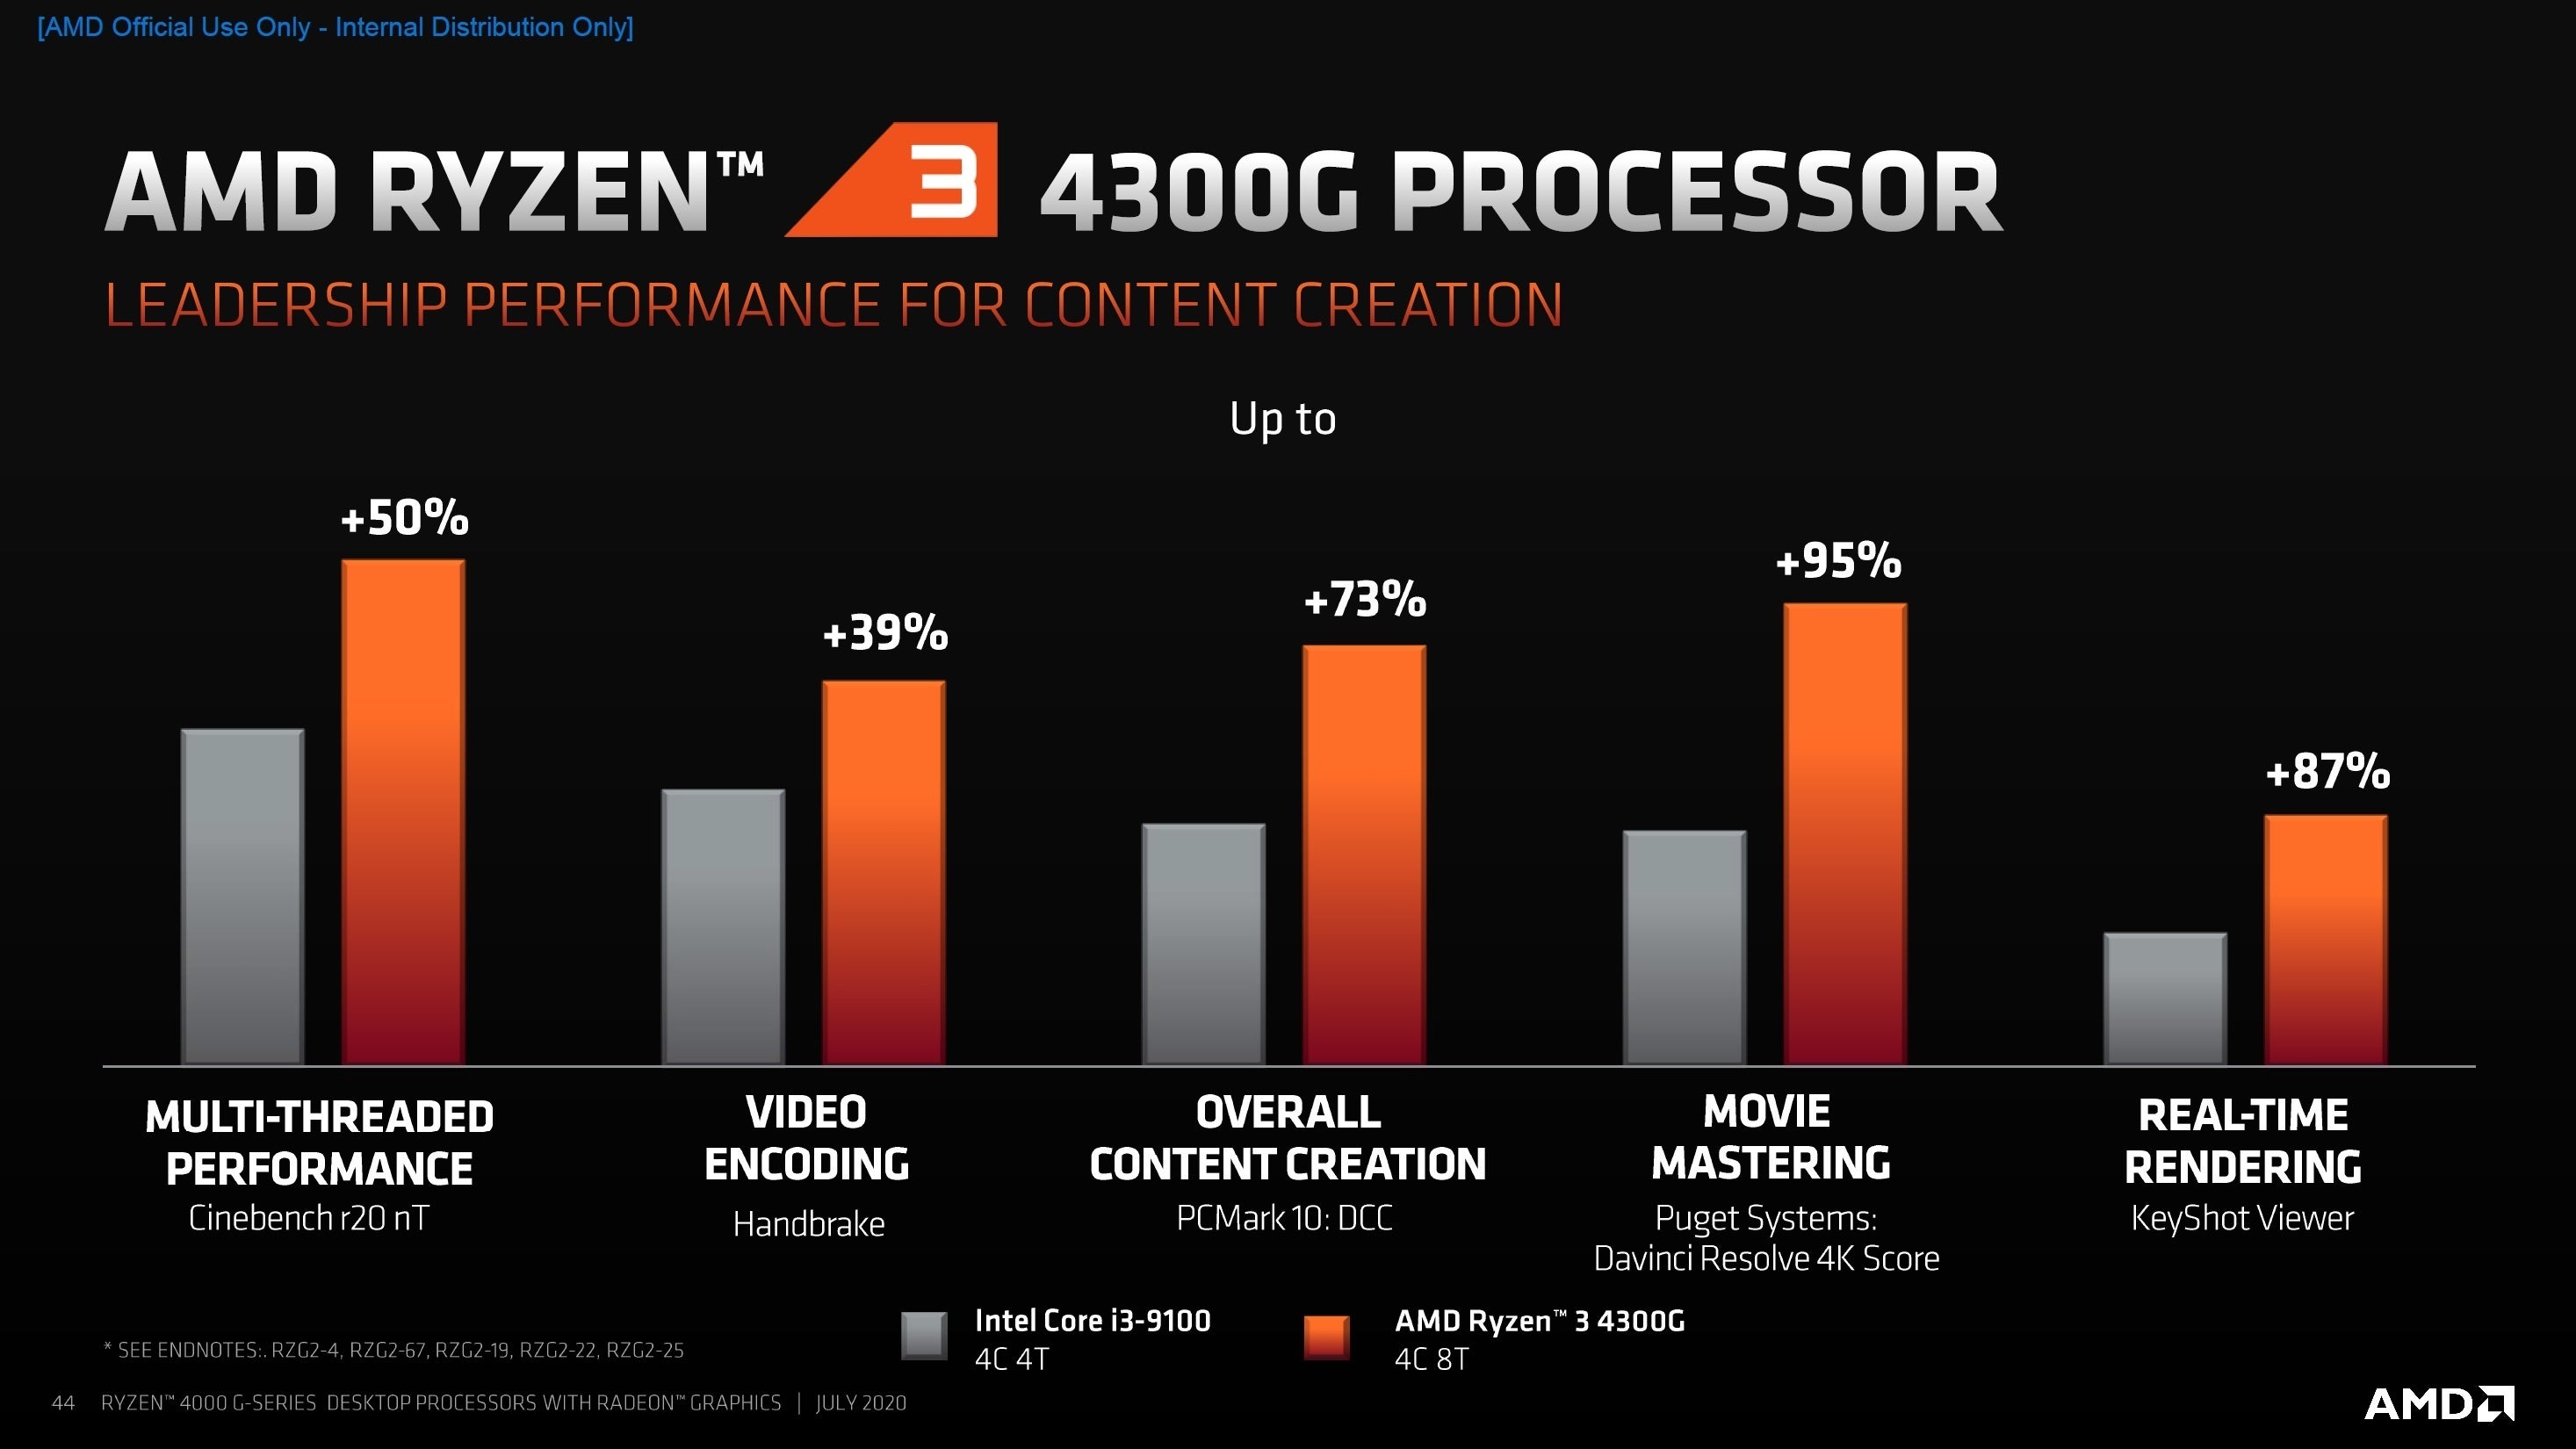 AMD's Ryzen 4000 G-series chips arrive, but the company promises you'll